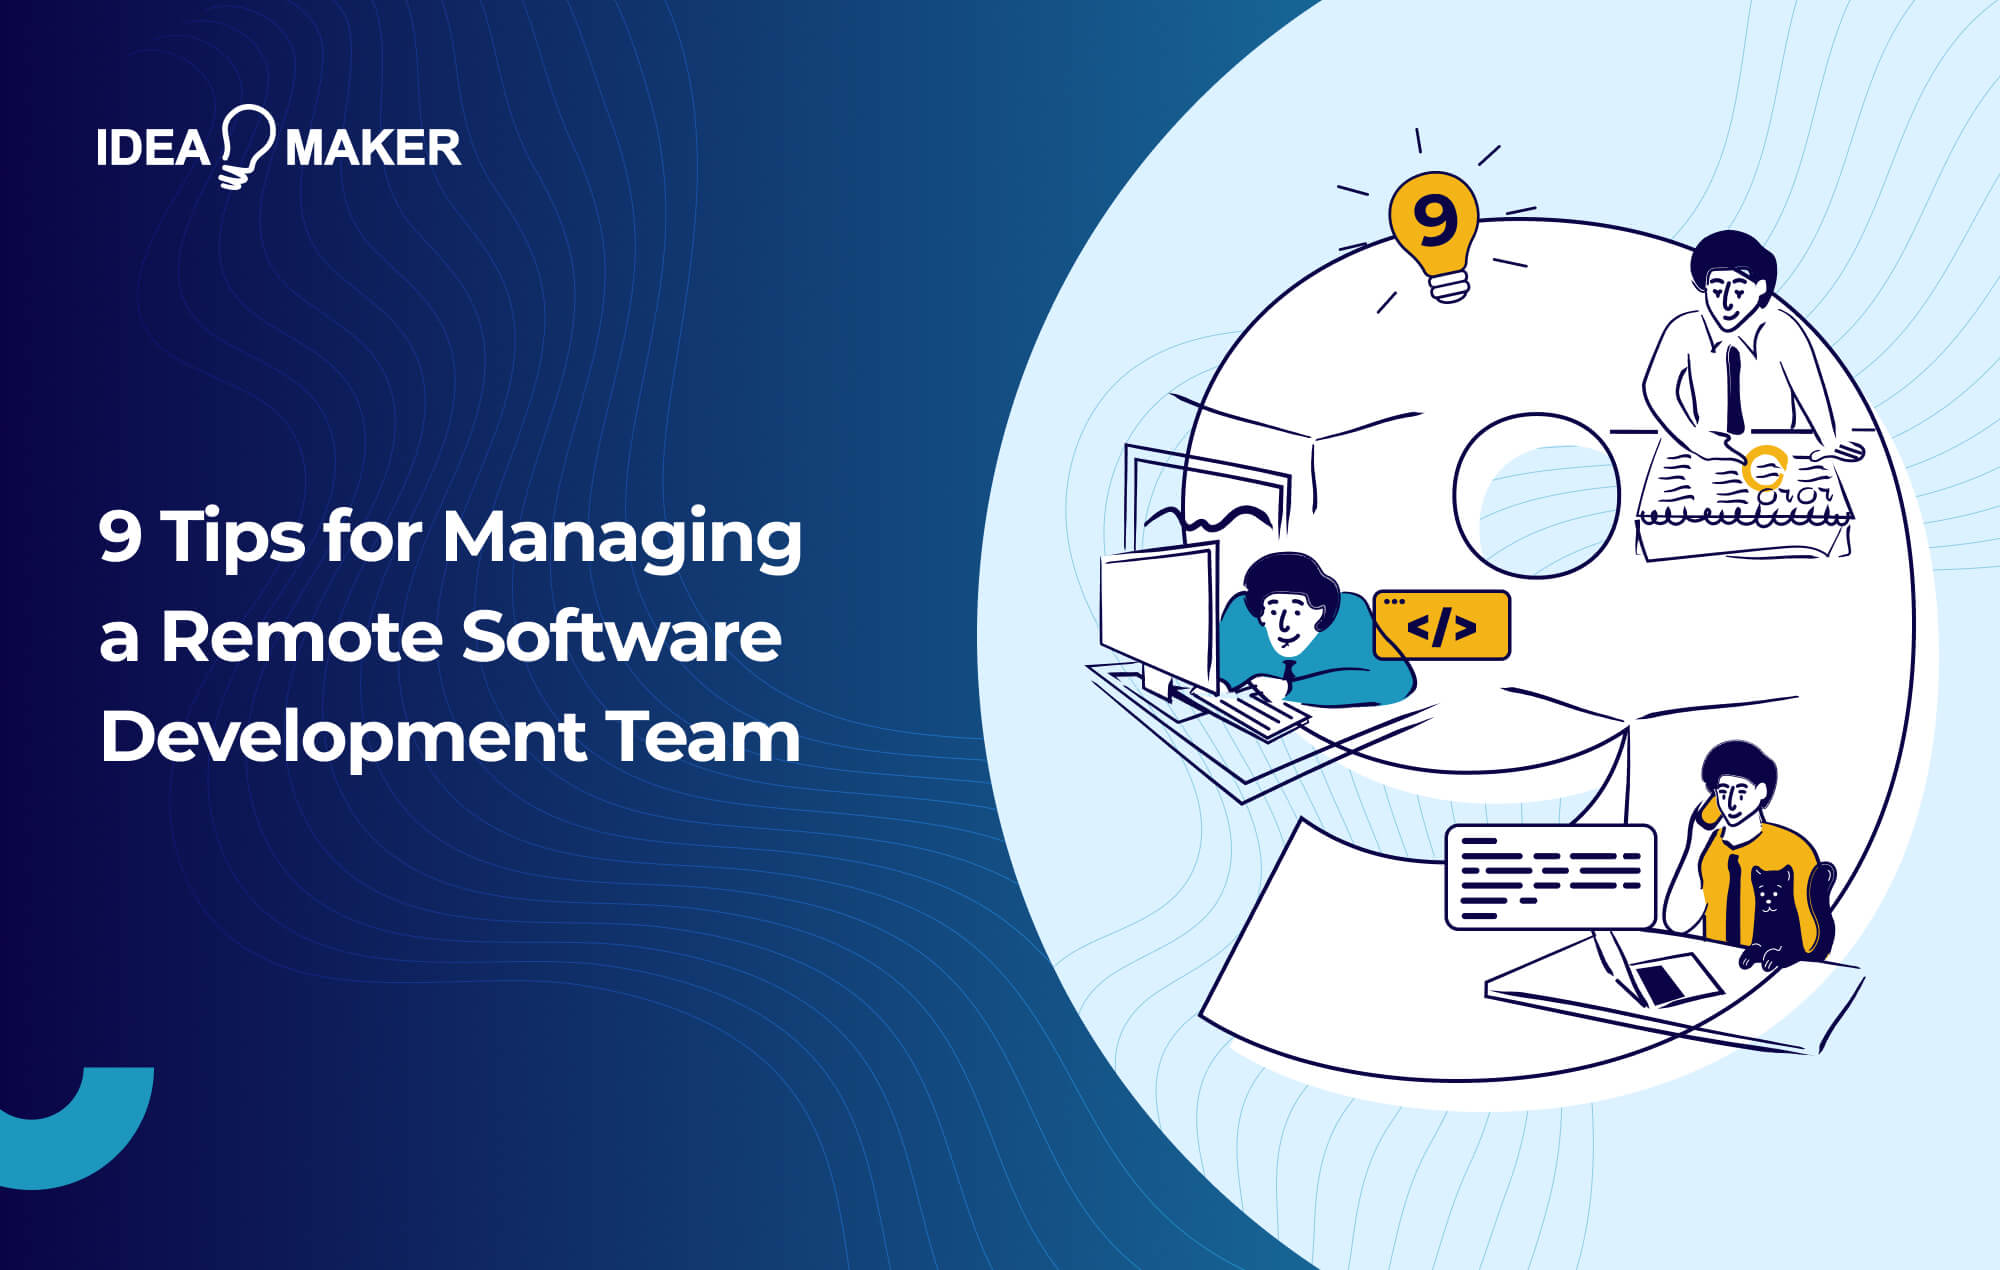 9 Tips for Managing a Remote Software Development Team